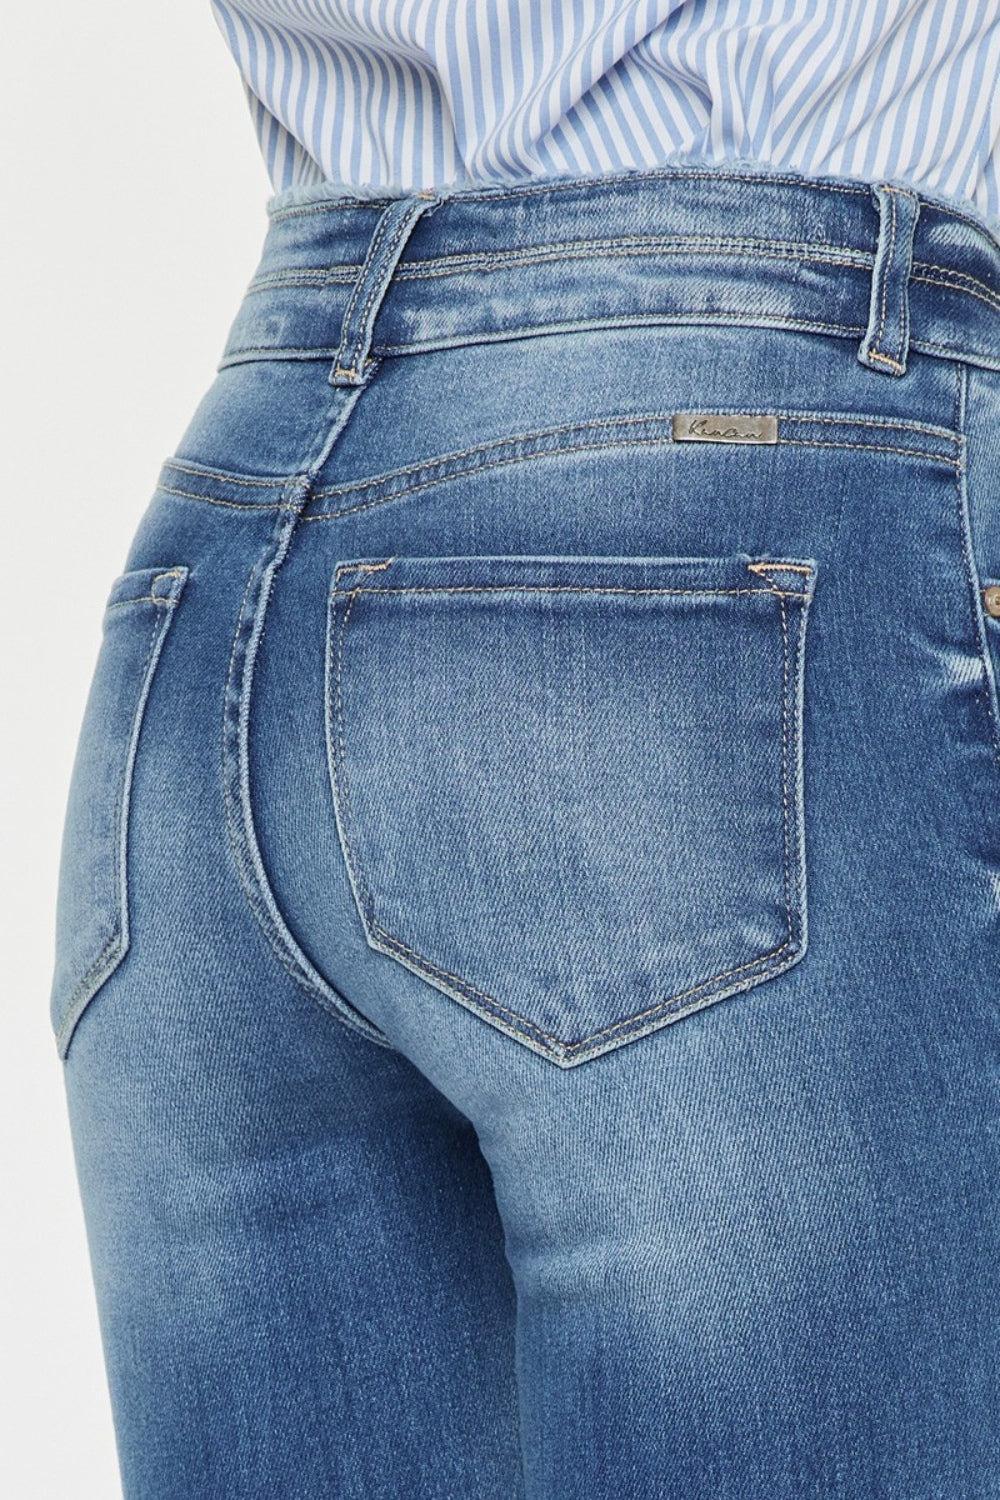 the back of a woman's jeans pants